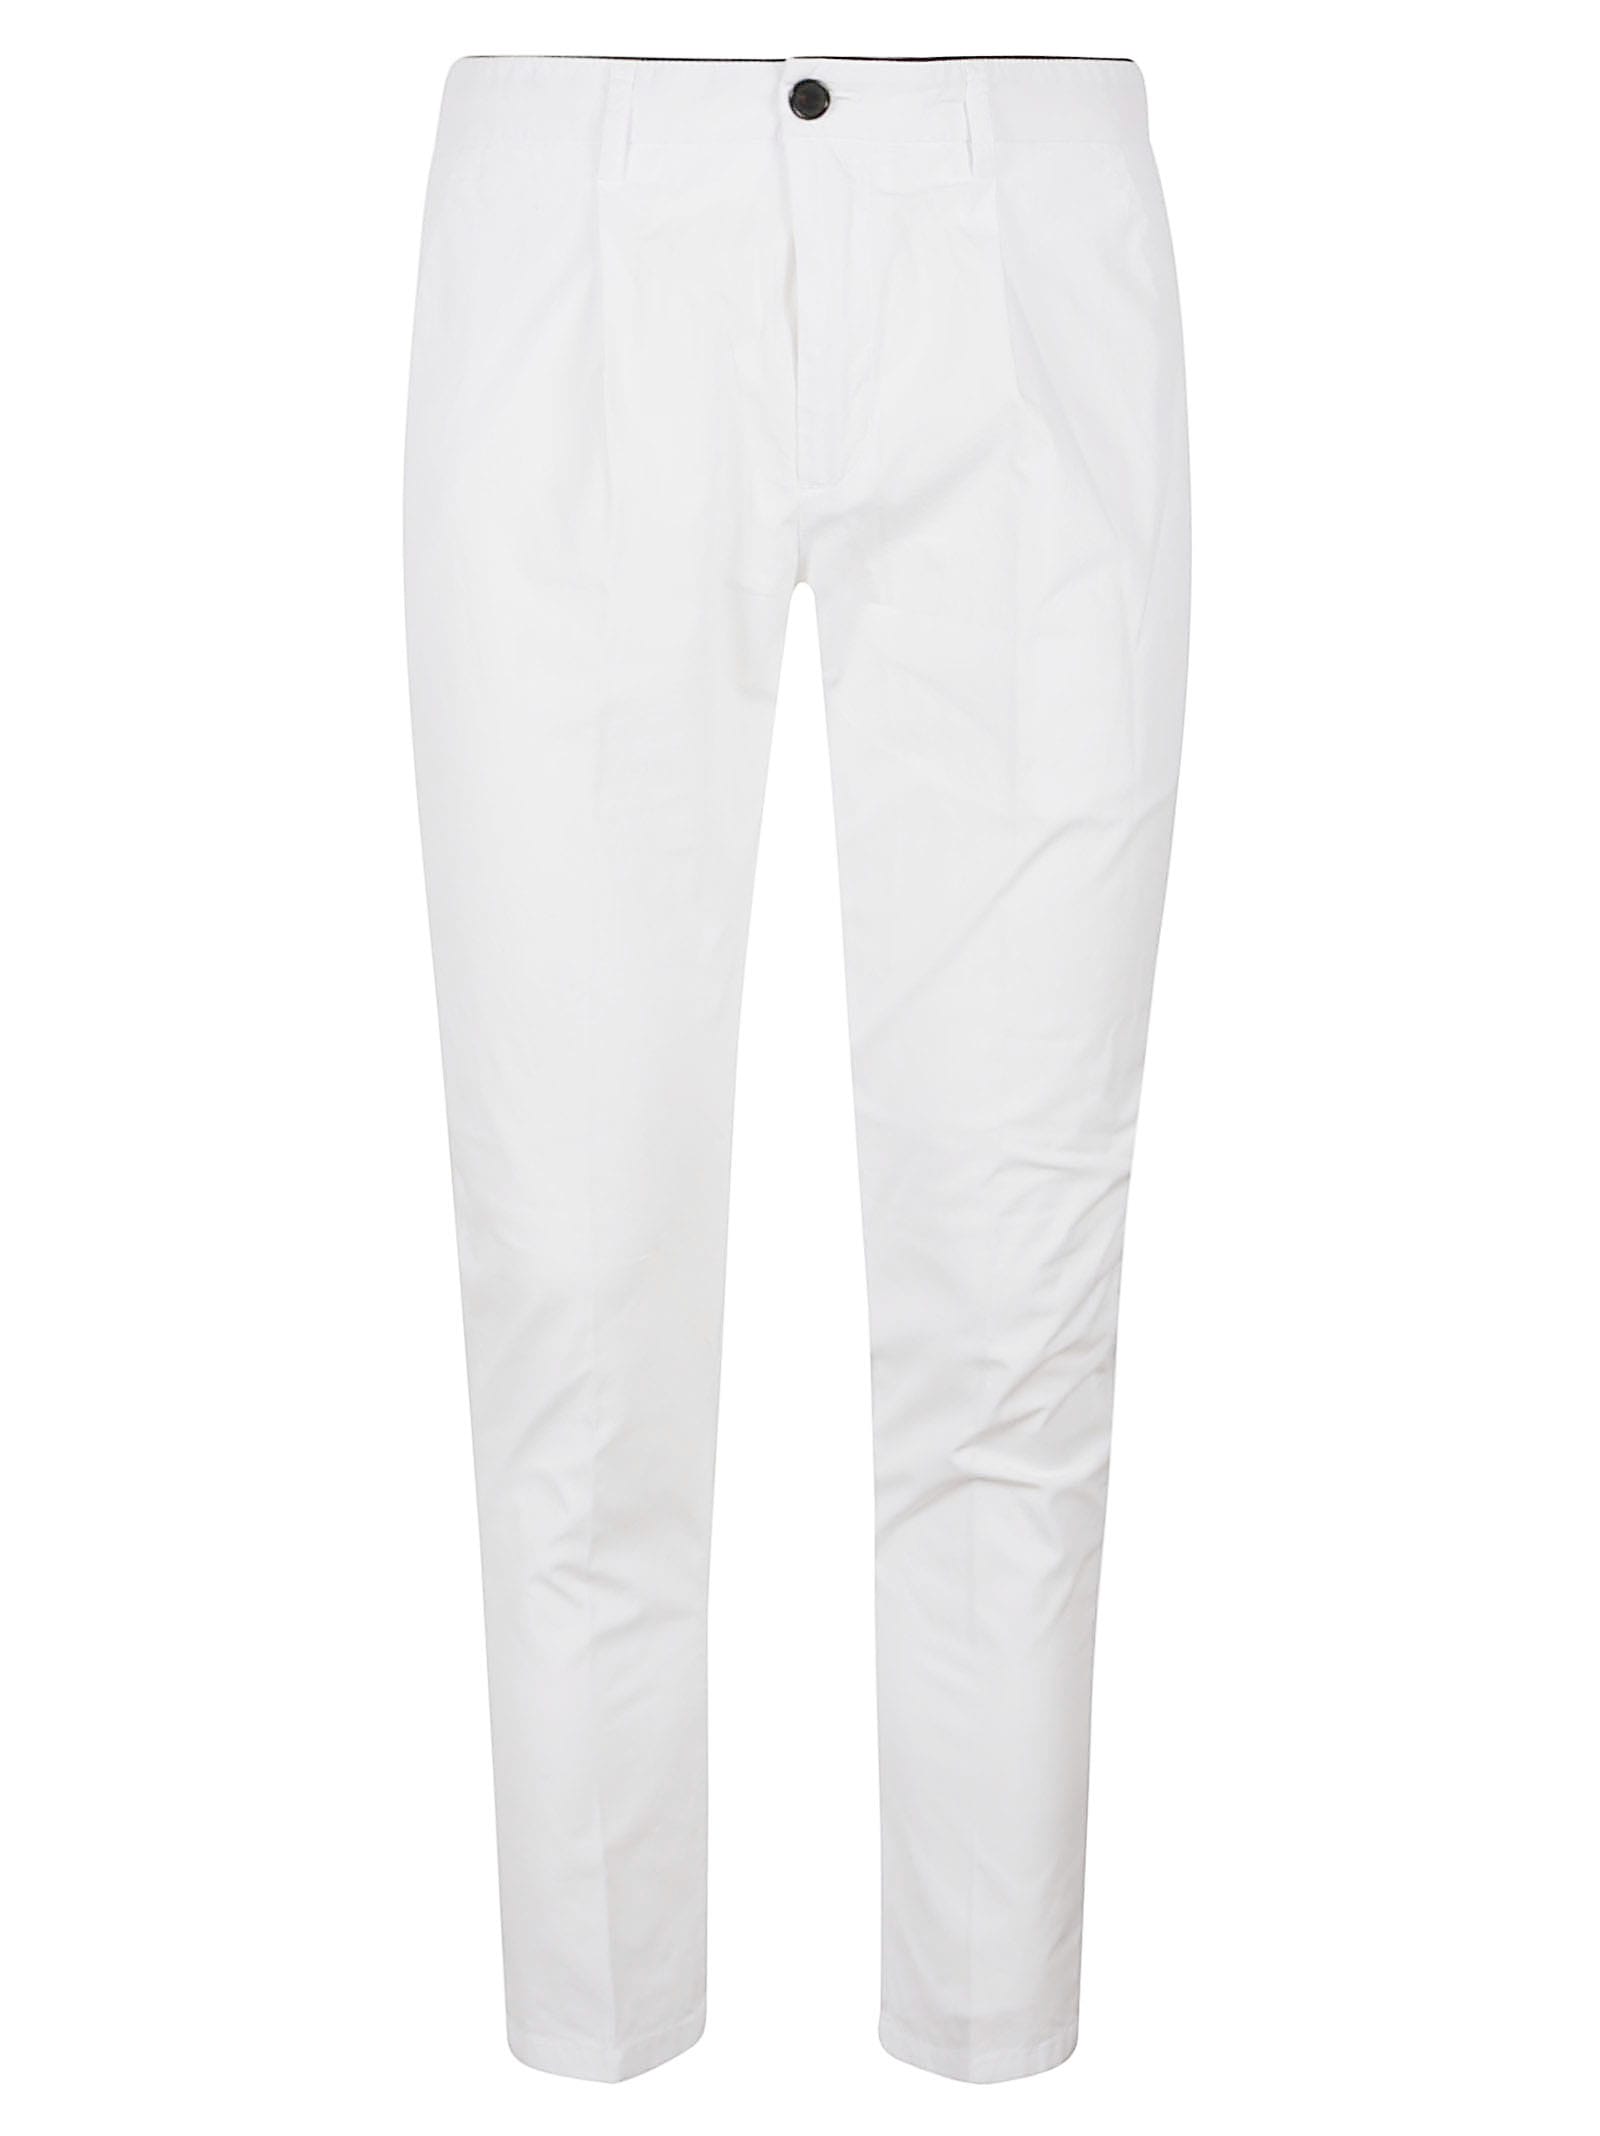 Department Five Prince Pences Chinos Trouser In Bianco Ottico